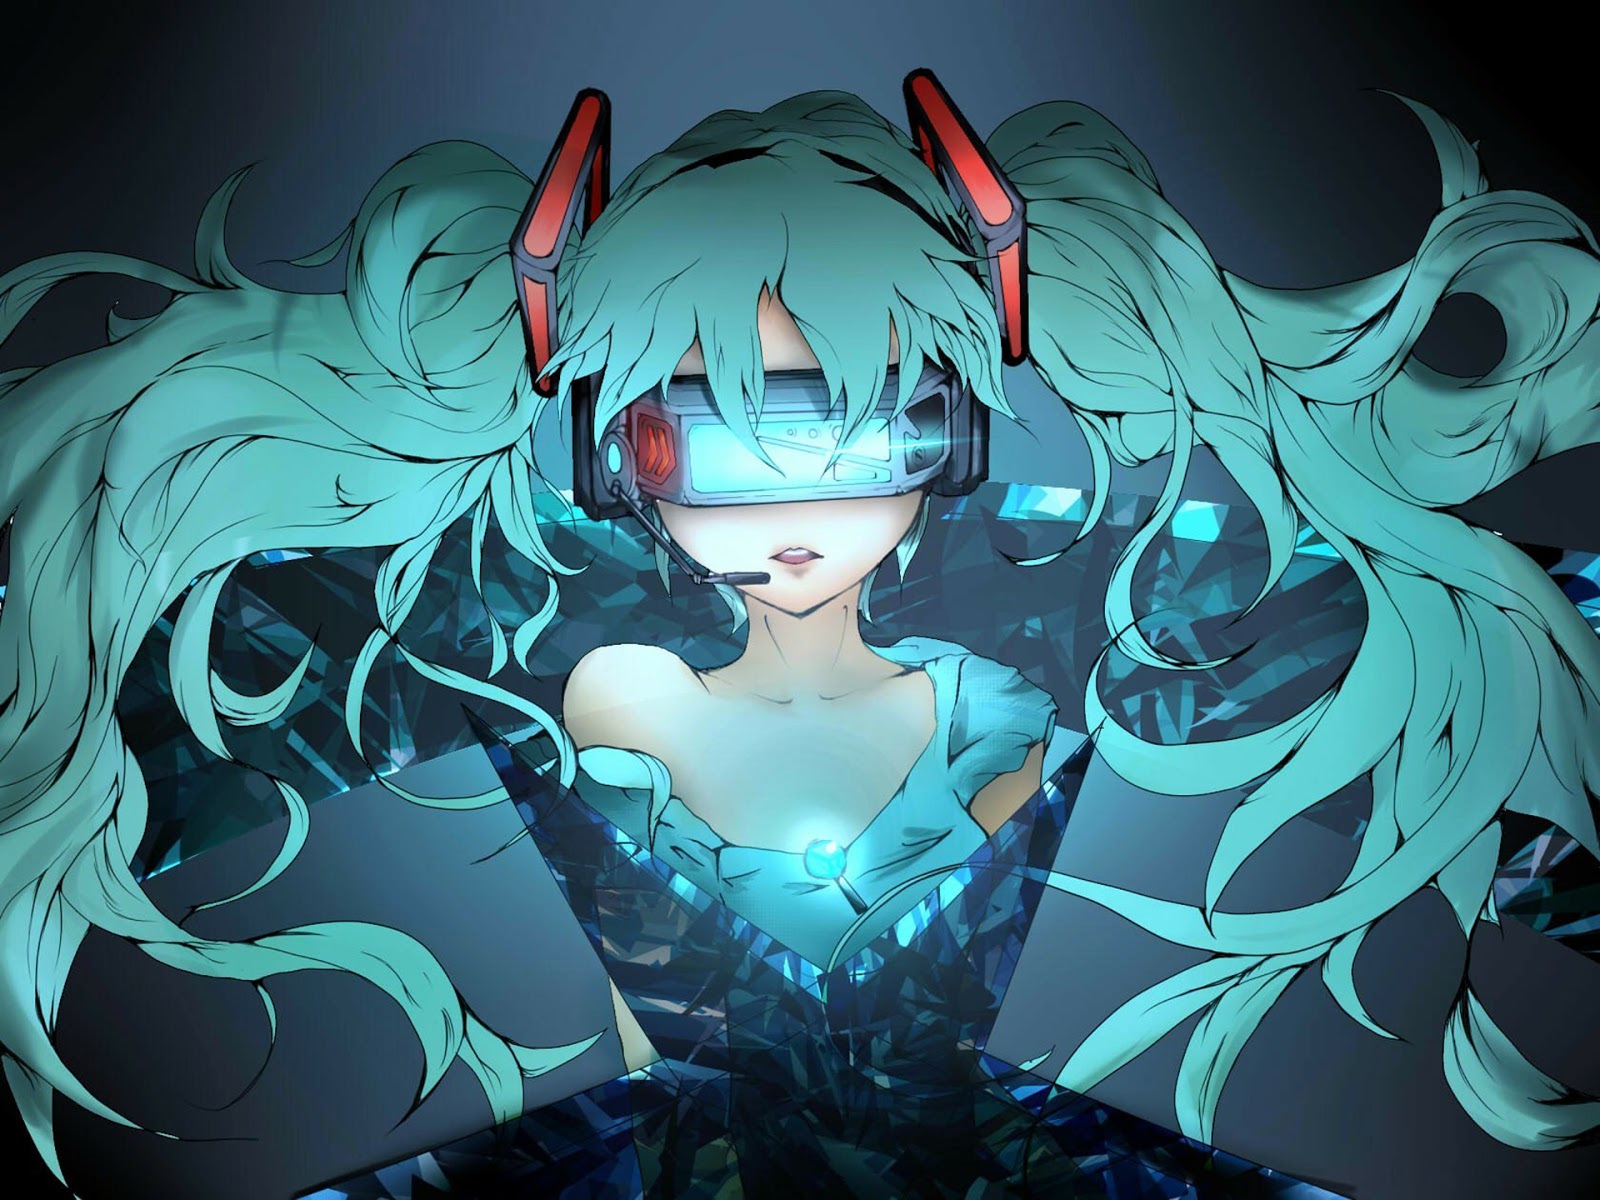 46+ Cool Vocaloid Wallpapers on WallpaperSafari